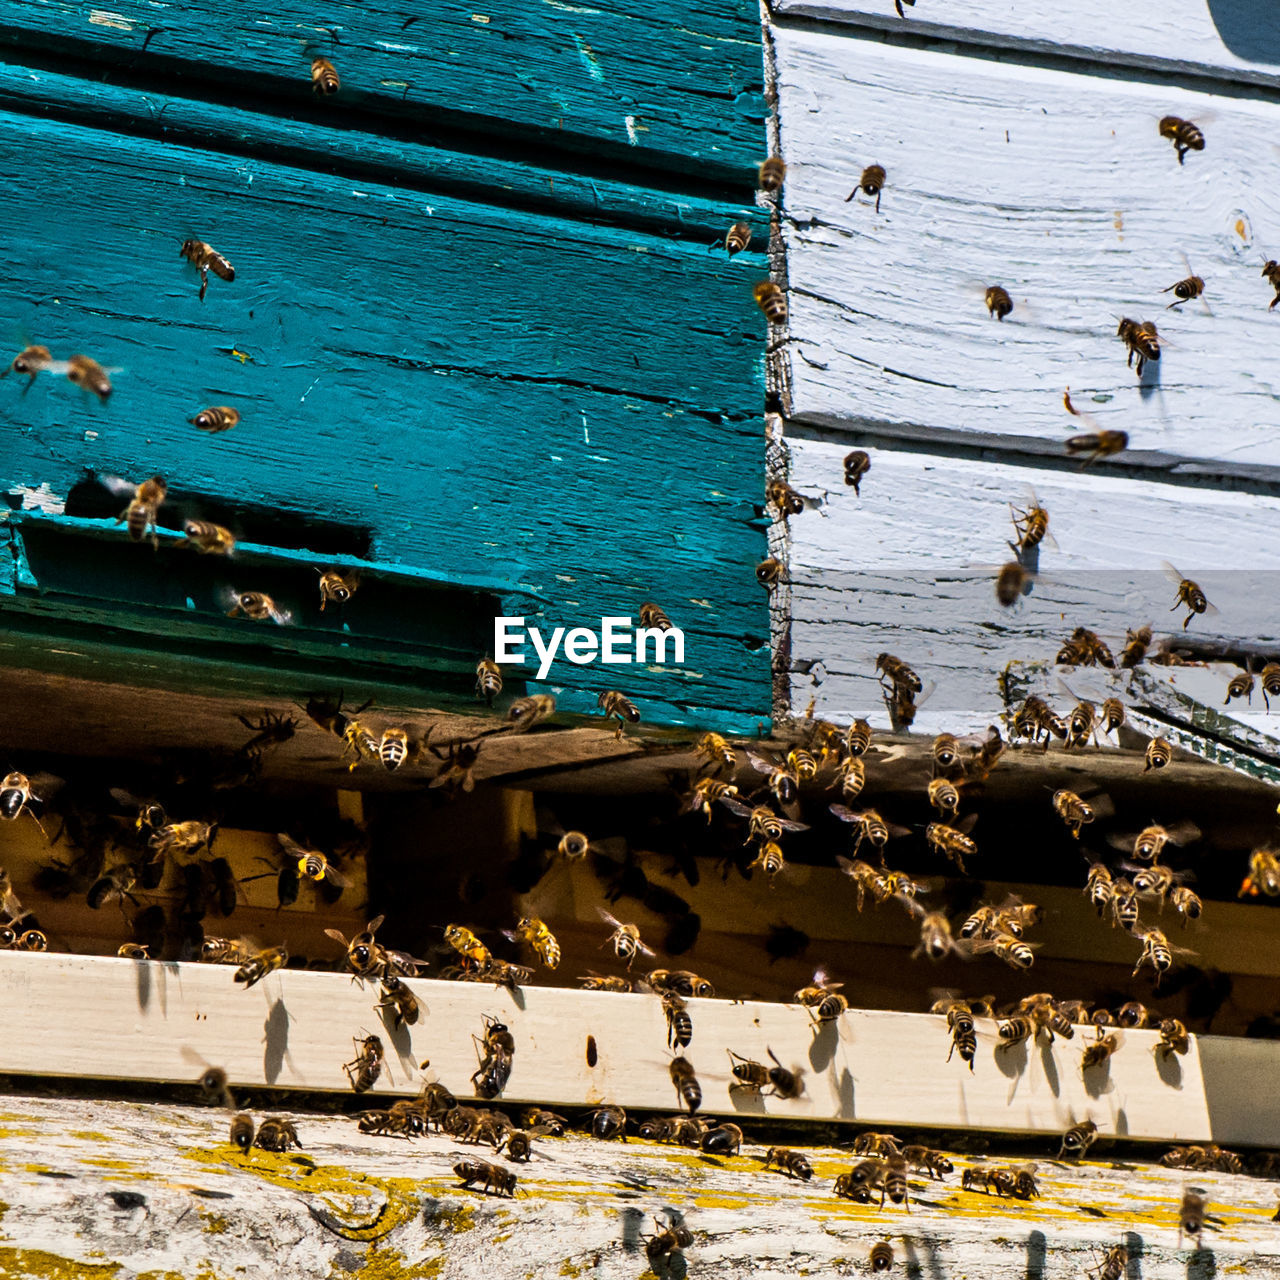 CLOSE-UP OF BEE ON WOODEN FLOOR